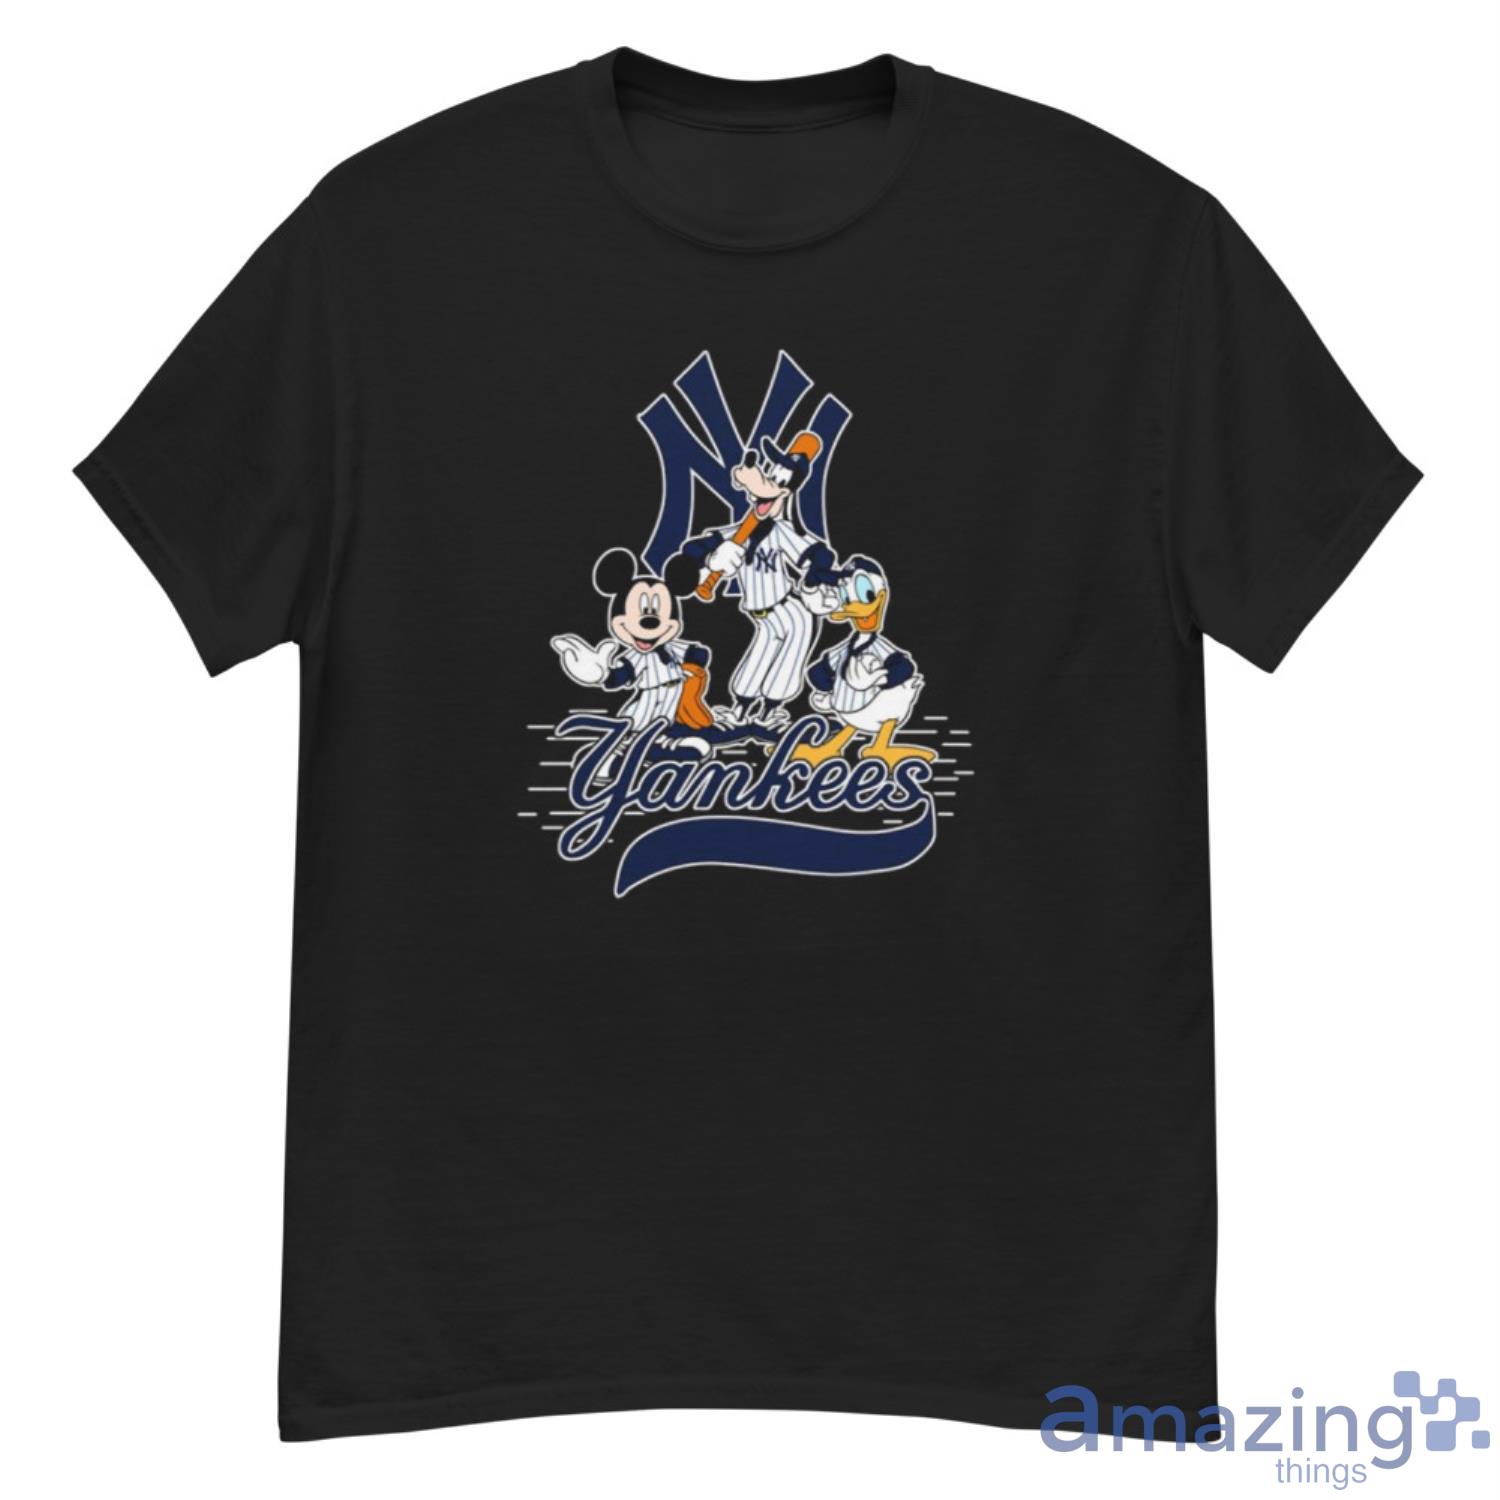 MLB Sport Fans New York Yankees Mickey Mouse Donald Duck Goofy